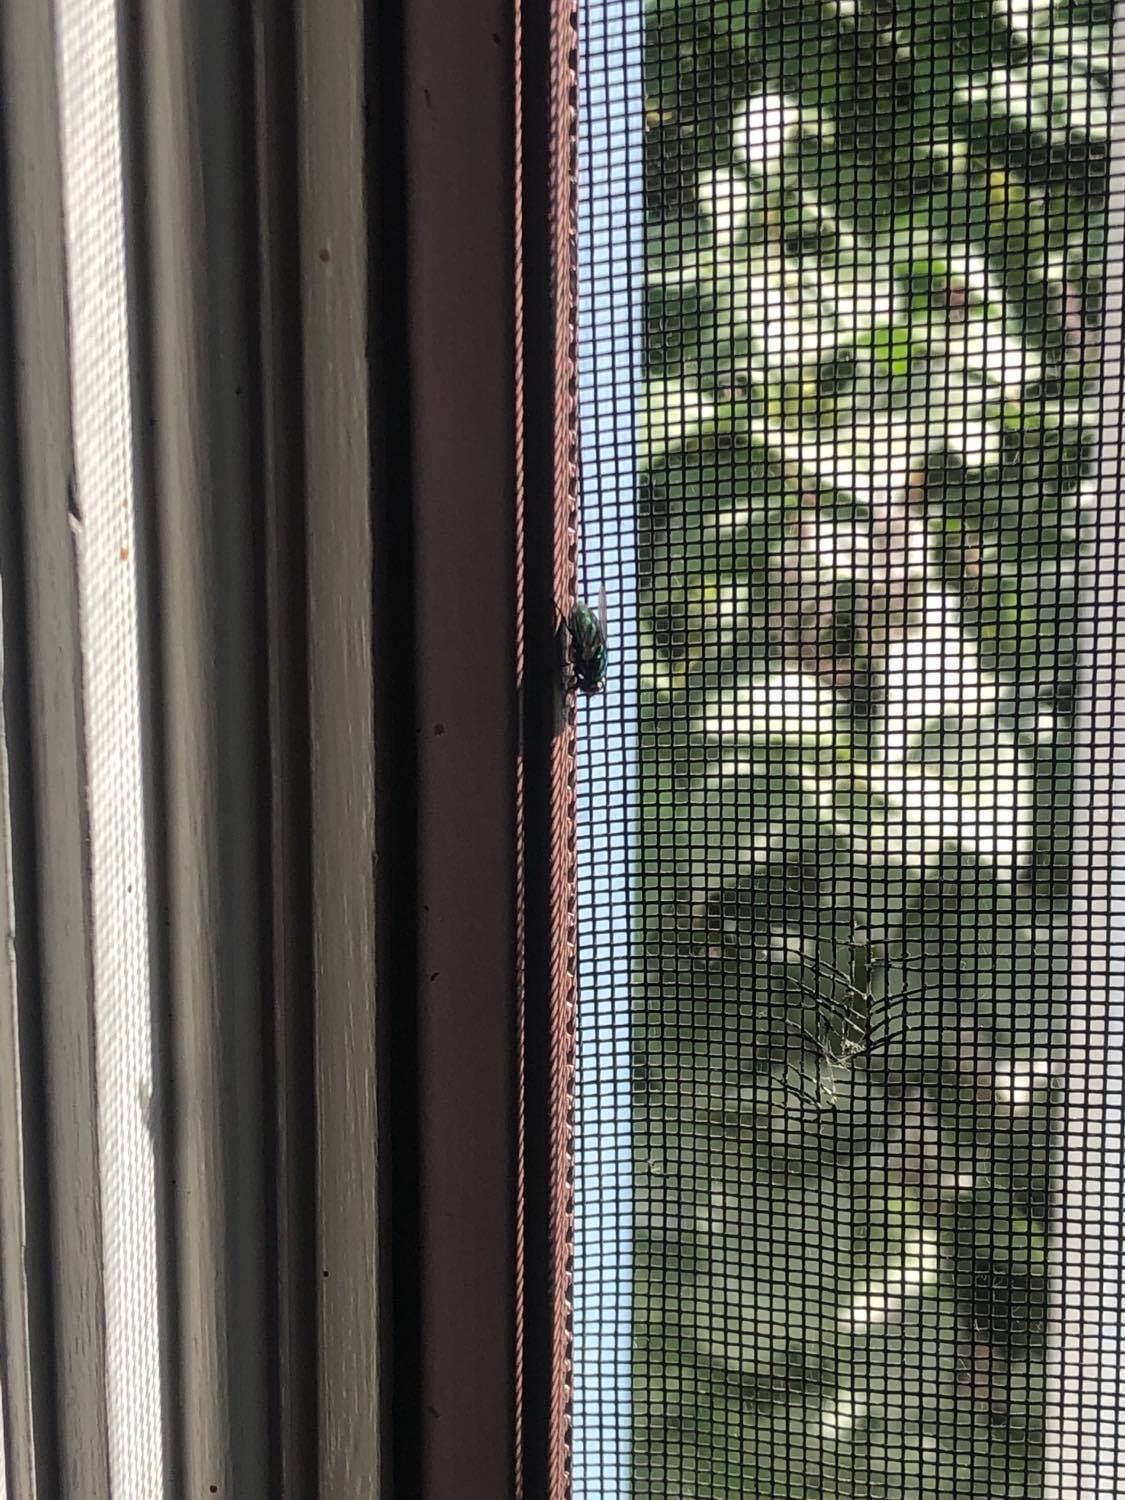 A fly sitting on the edge of a window screen, waiting to be let out. He's all bright and shiny, waiting in the sunlight.